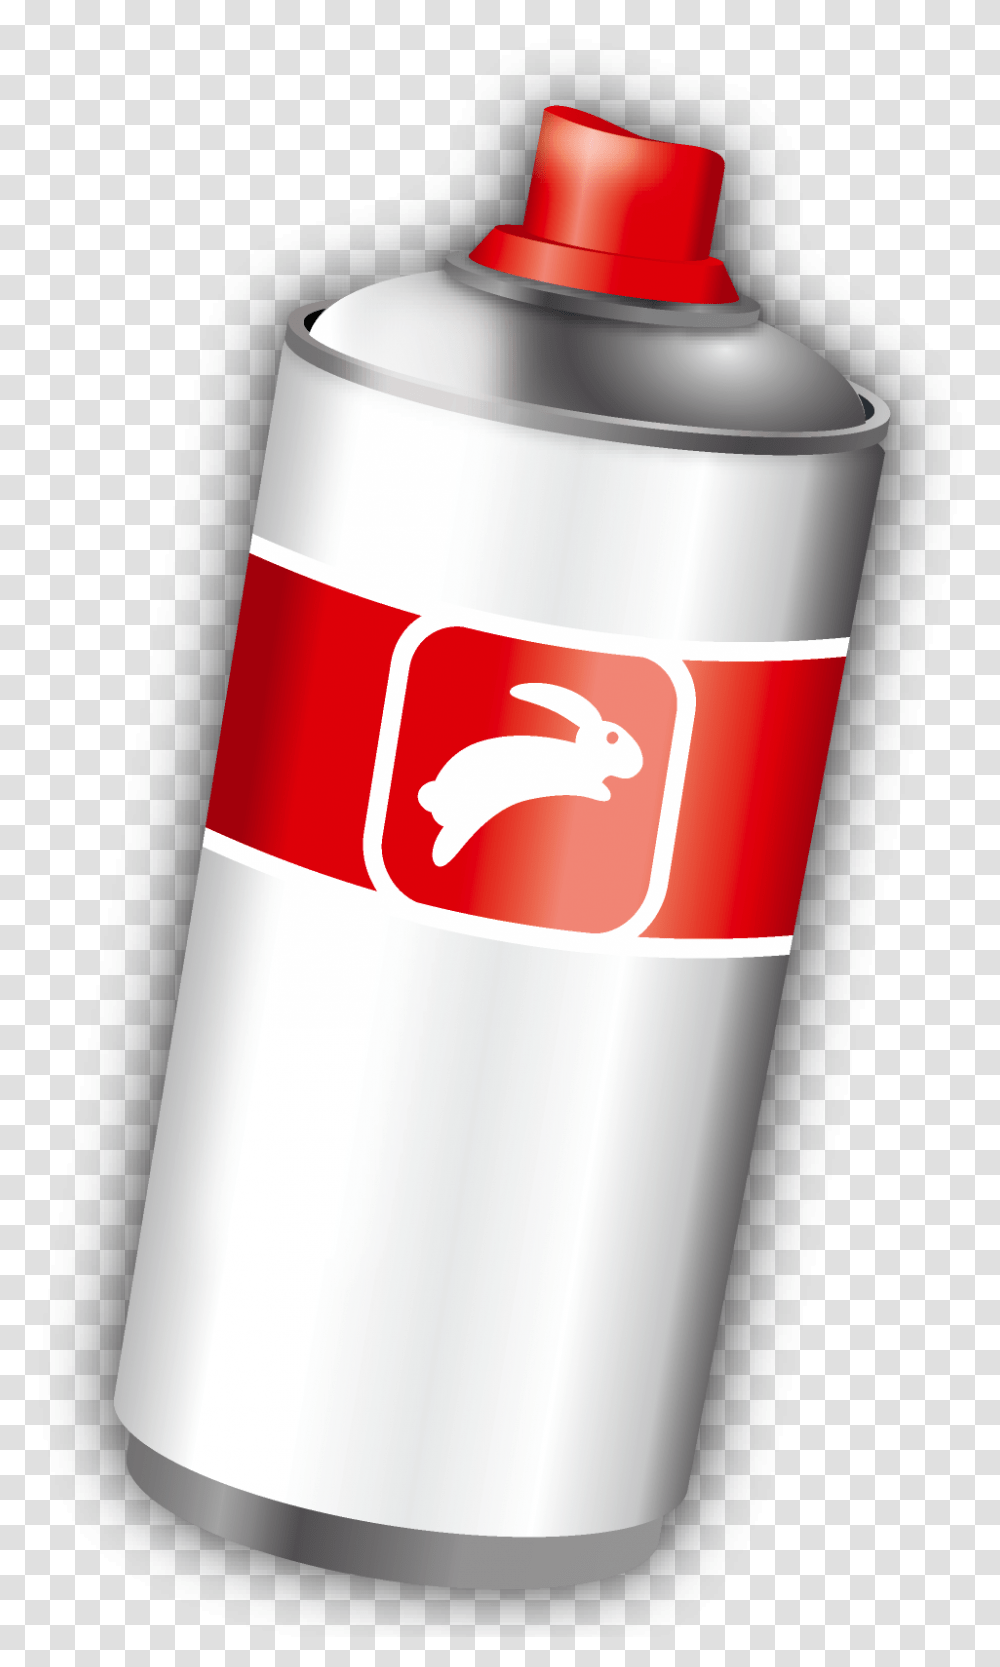 Spray Can Image Spray Paint Can Background, Shaker, Bottle, Soda, Beverage Transparent Png